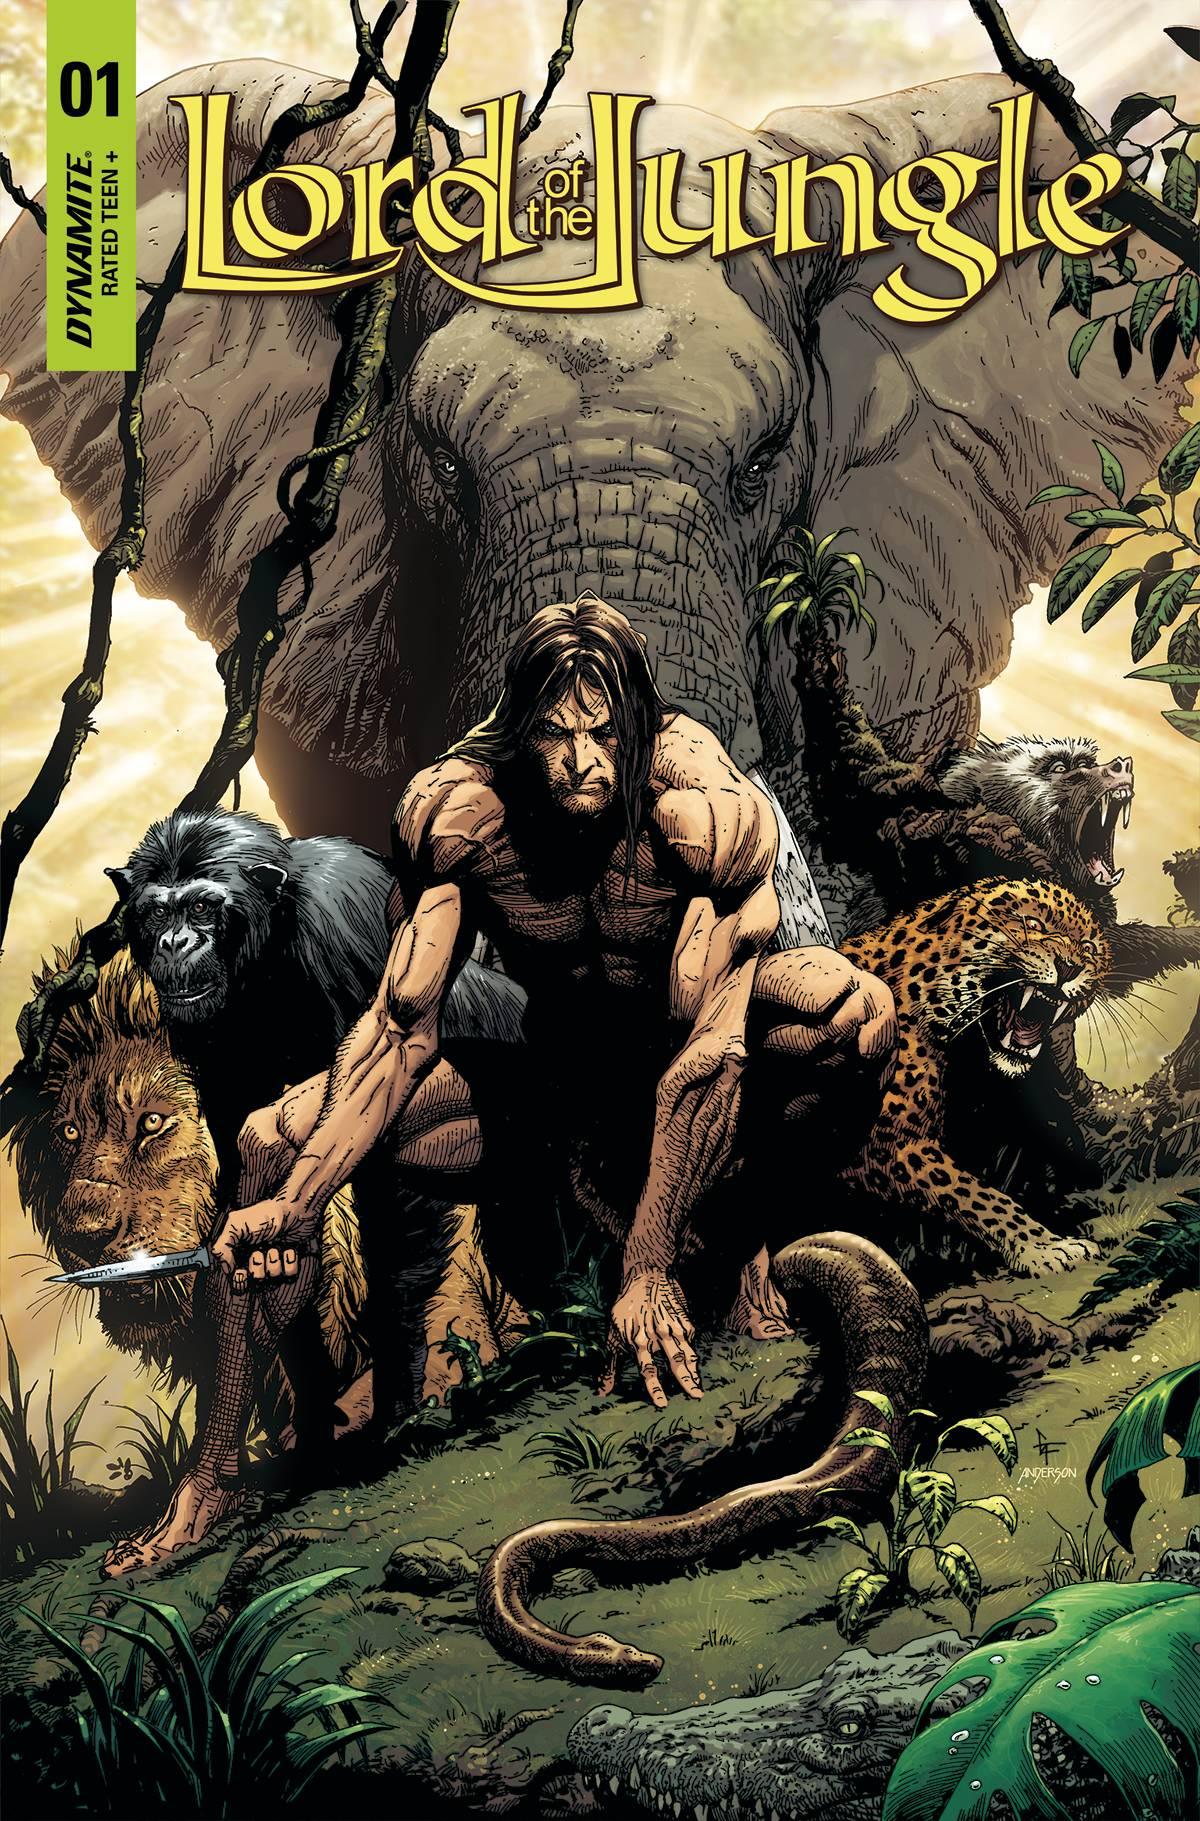 LORD OF THE JUNGLE #1 CVR A FRANK - HolyGrail Comix